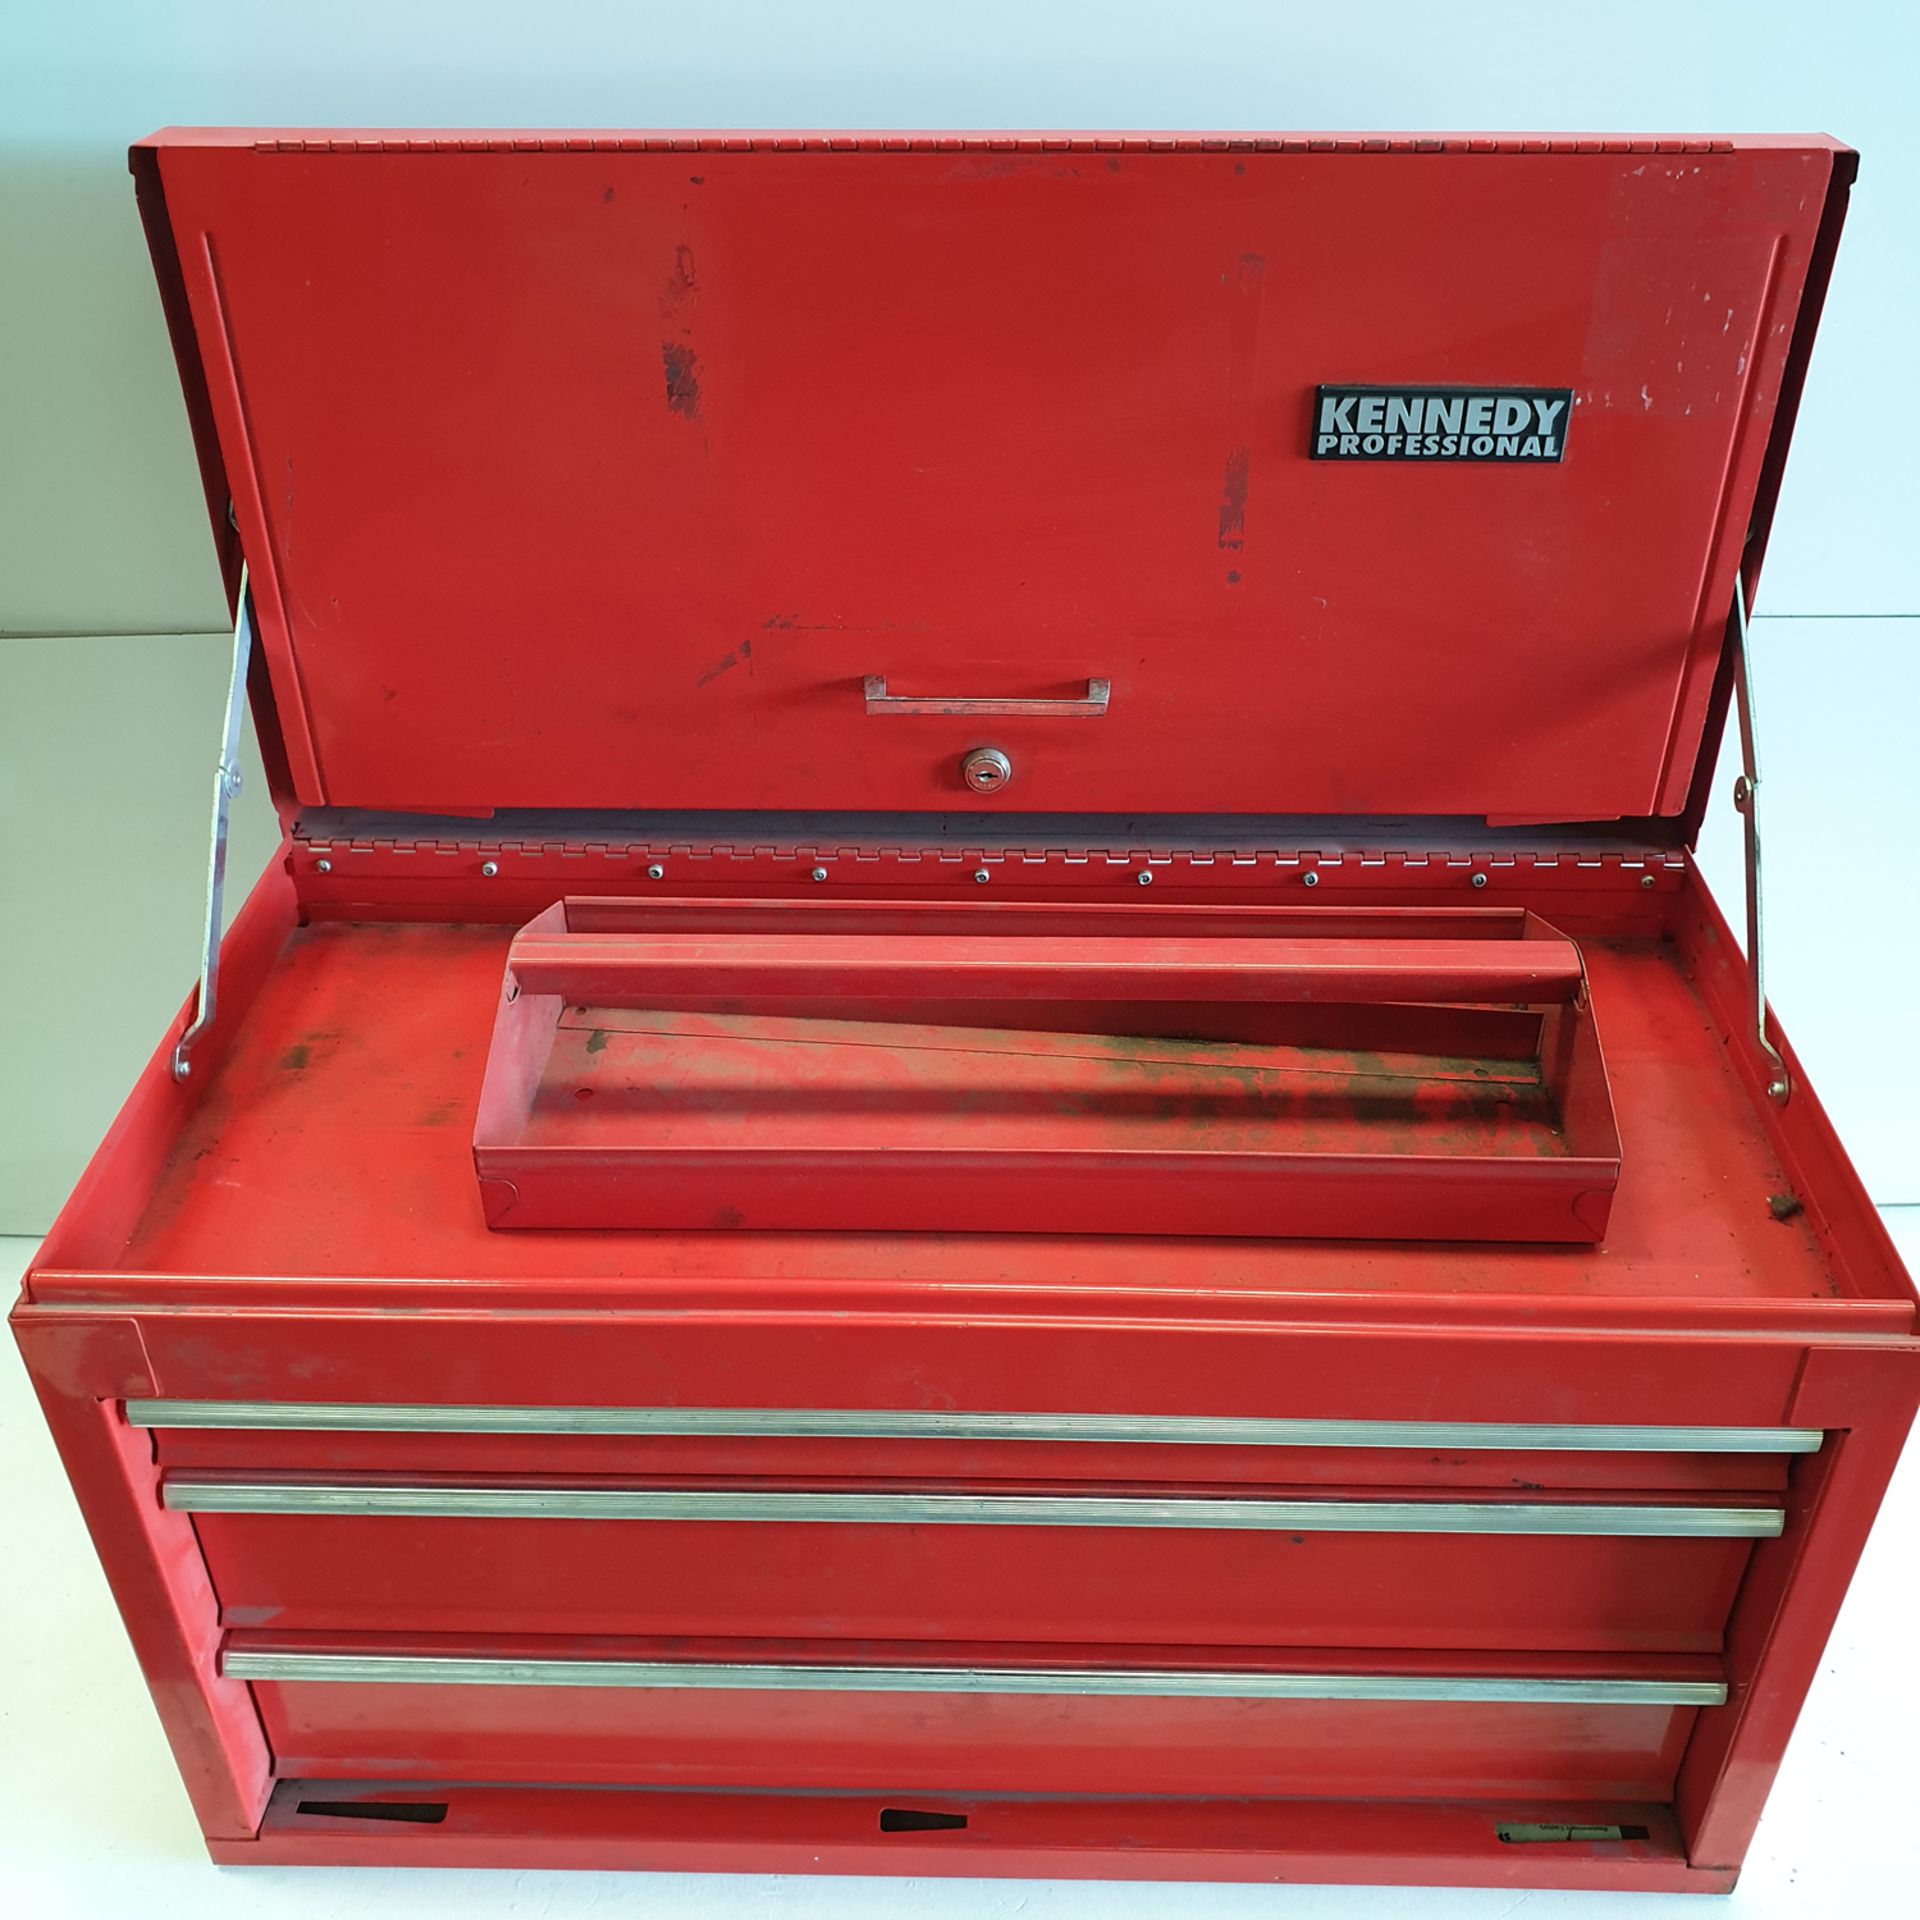 Kennedy Proffesional Steel Tool Box. Approx Dimentions 670mm x 330mm x 390mm High. - Image 4 of 7